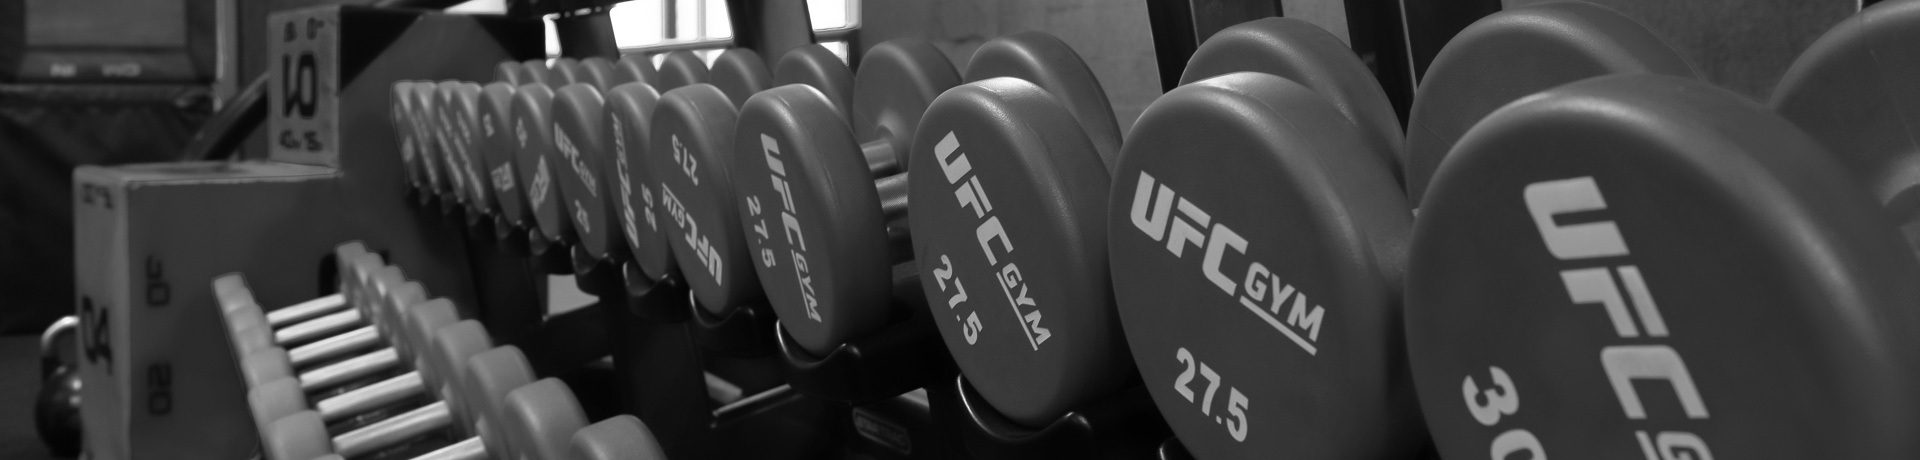 black and white photo of UFC Gym free weights on a rack